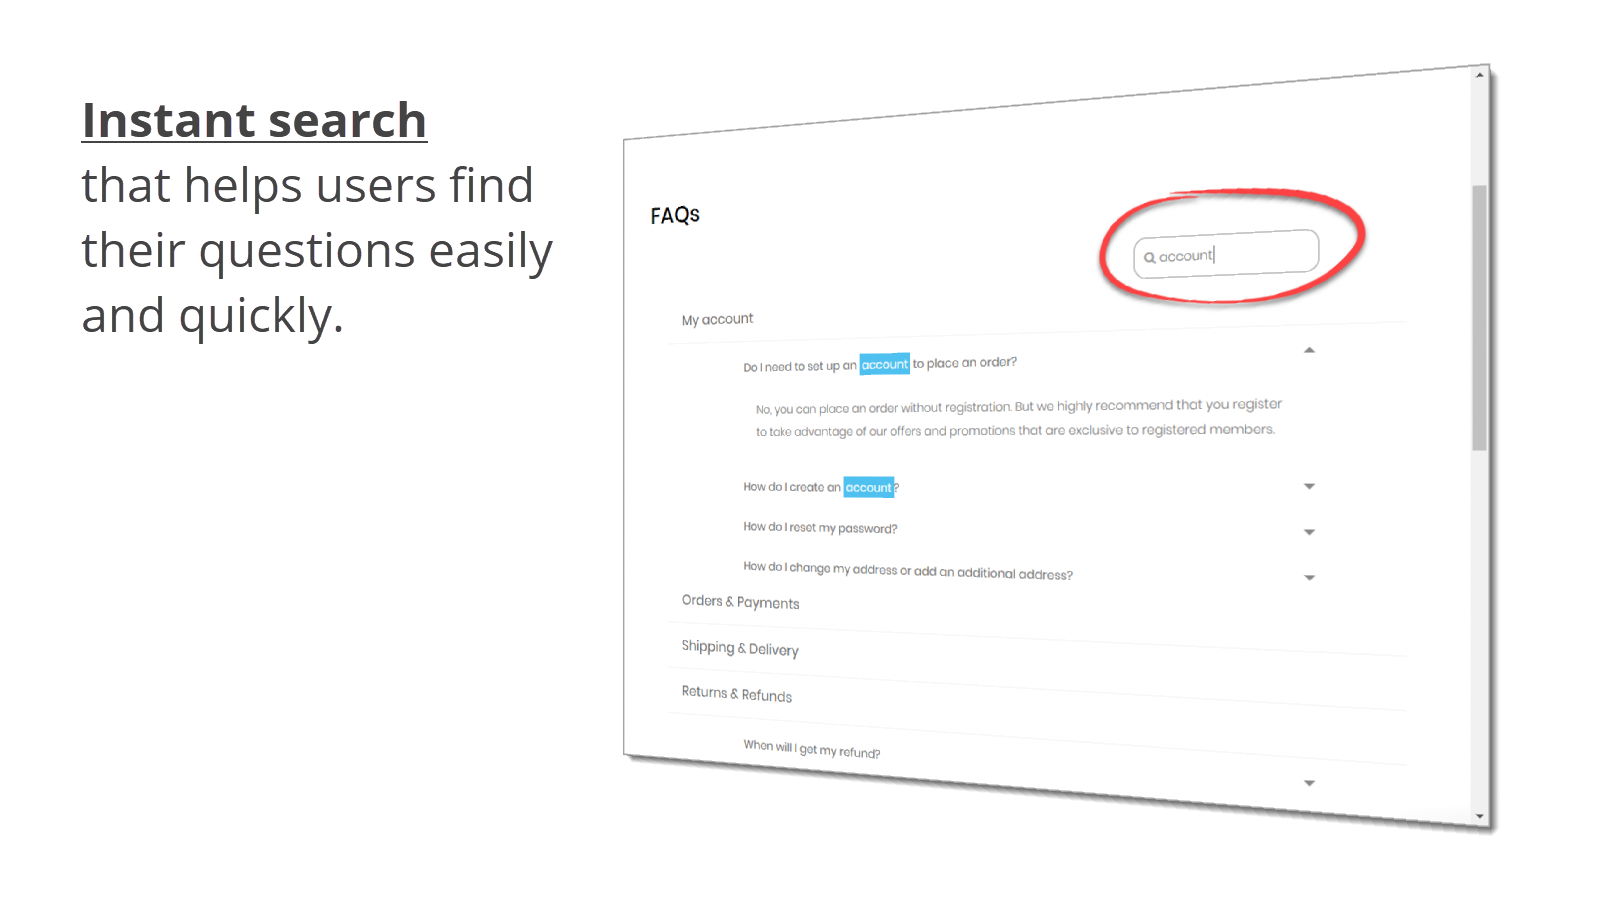 Instant search that helps customers find their questions easily